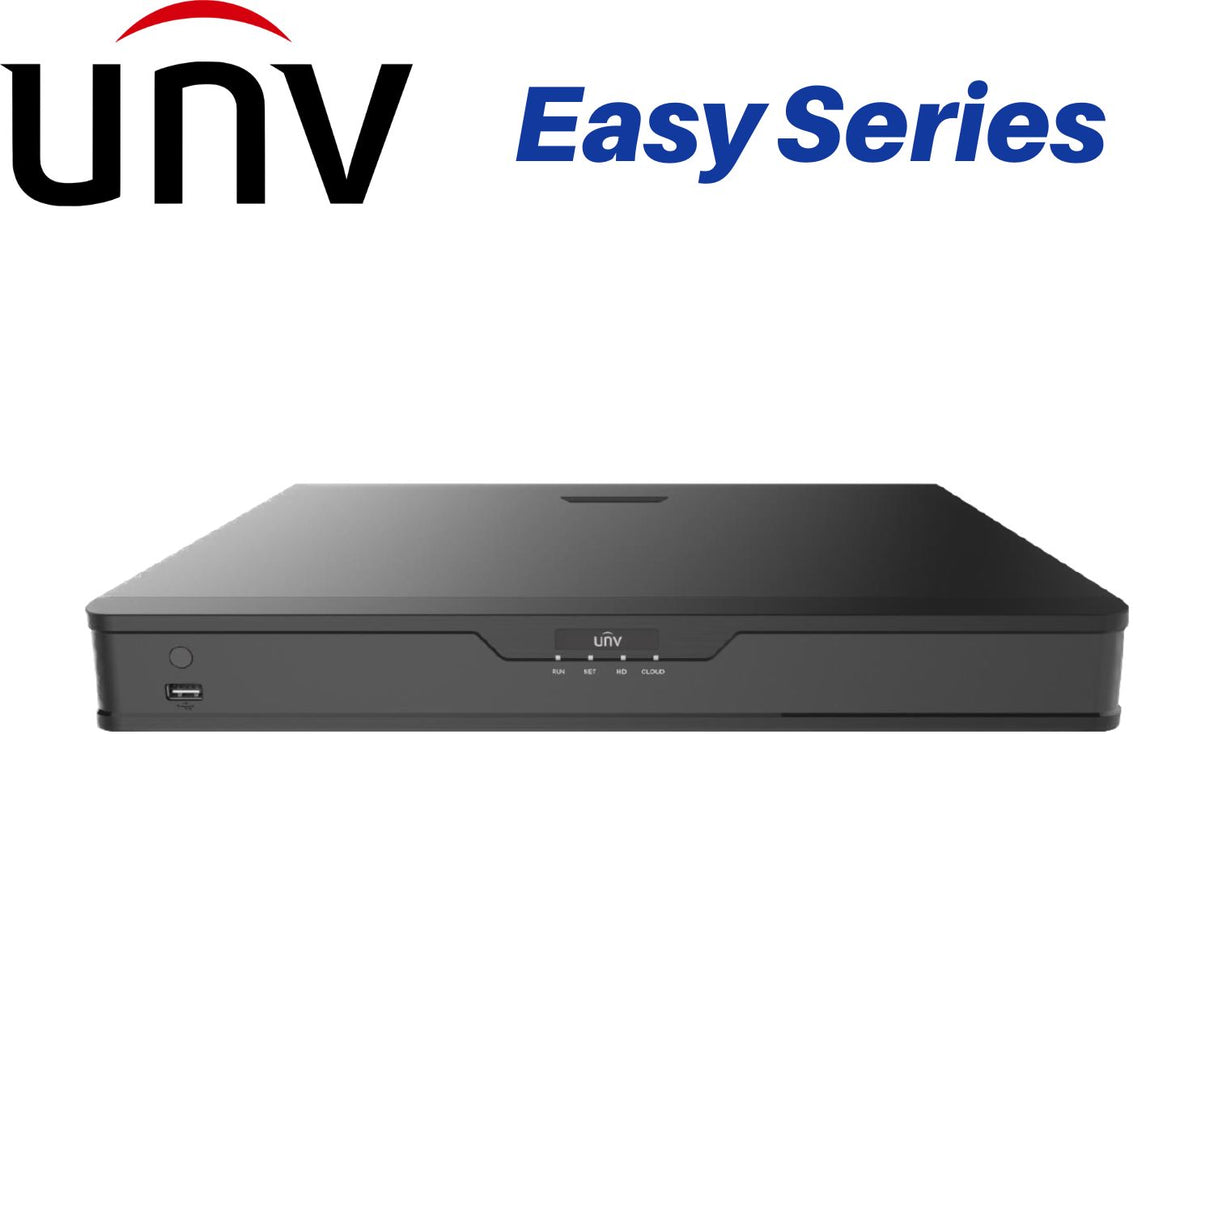 Uniview 8CH Network Video Recorder: 8MP/4K, 80MBPS INPUT, 2-SATA HDD, Easy Series - NVR302-08S2-P8